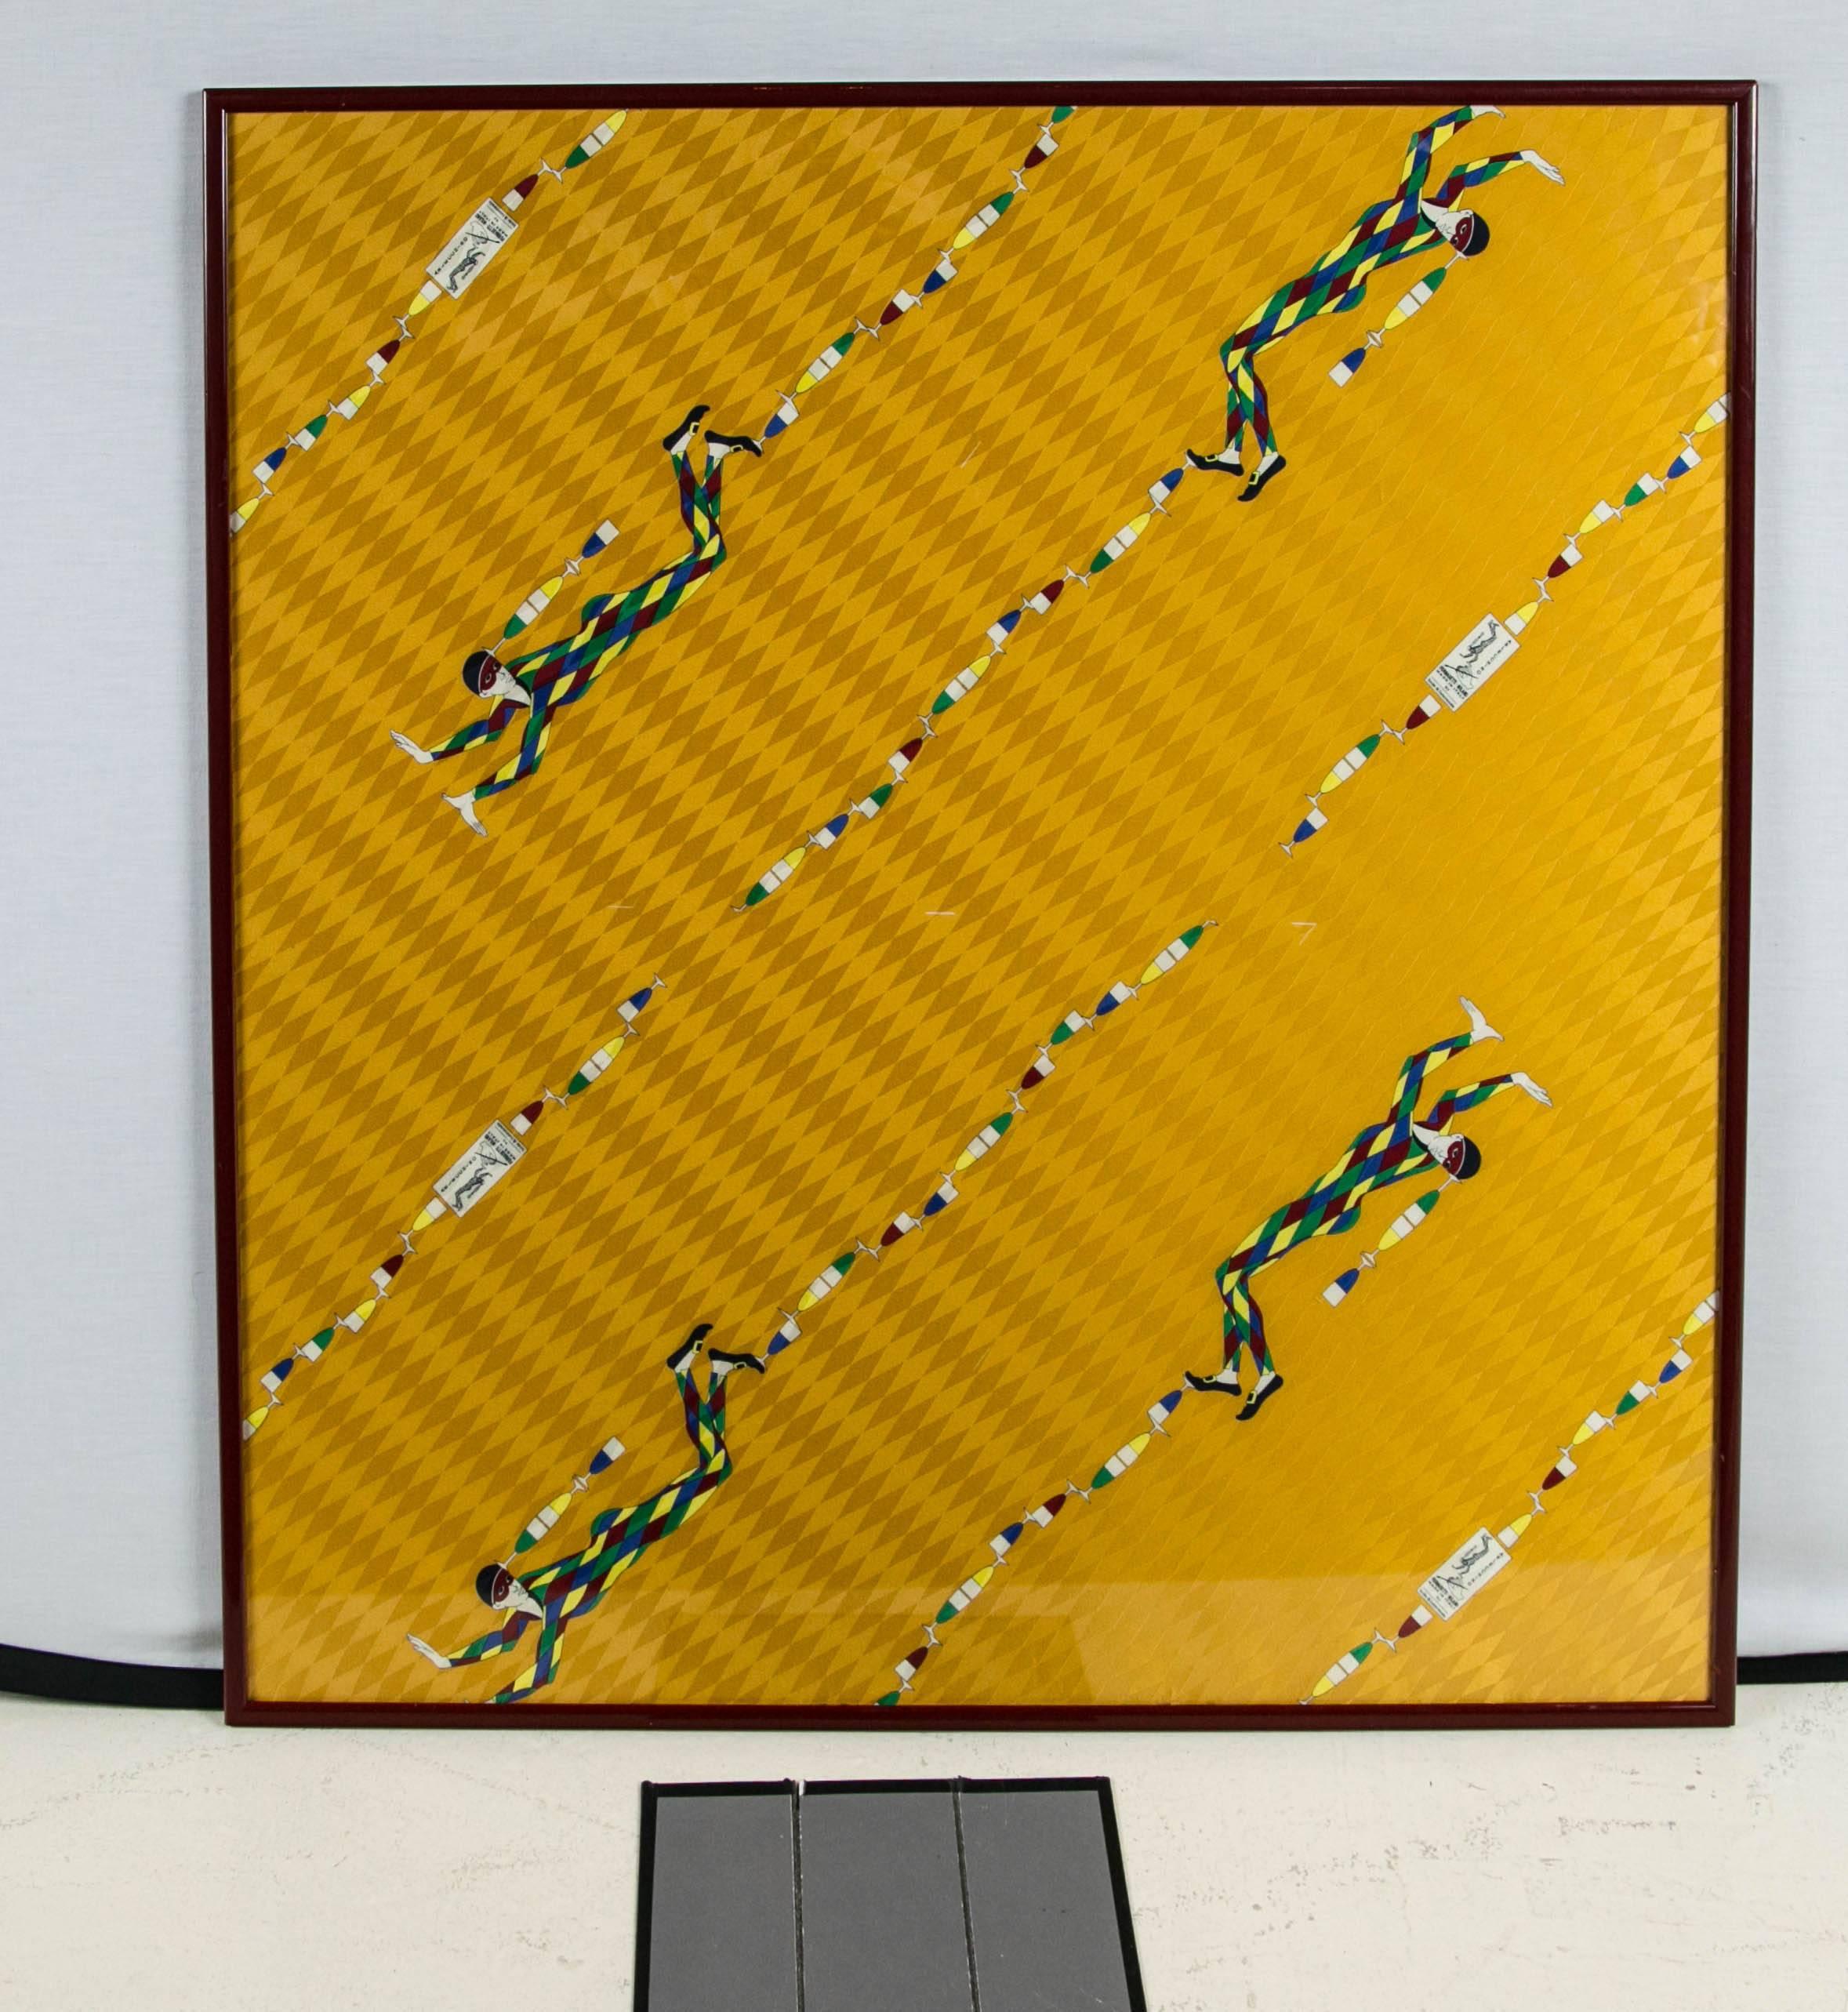 Rare Mid-Century Harlequin scarf framed. Scarf an early theme in Fornasetti designs. Pristine condition and signed in two places. A very unique and special example of the brilliance of Fornasetti. Bought from collector in Europe.